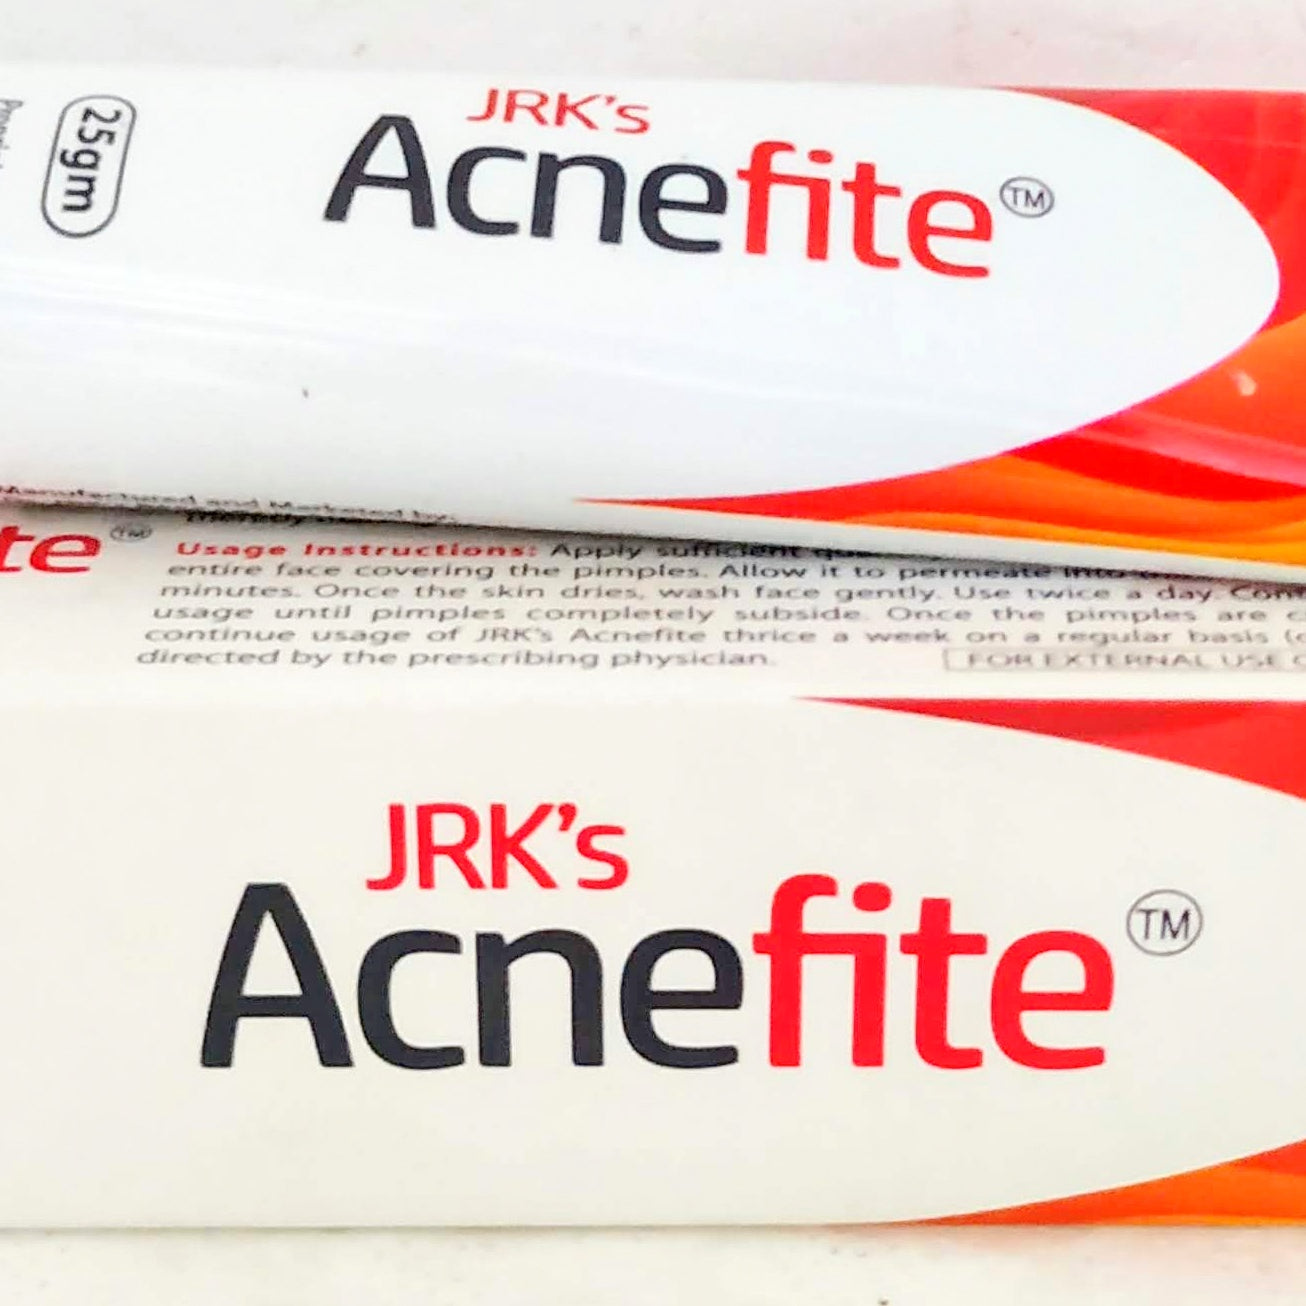 Shop Acnefite Cream 25gm at price 140.00 from Dr.JRK Online - Ayush Care